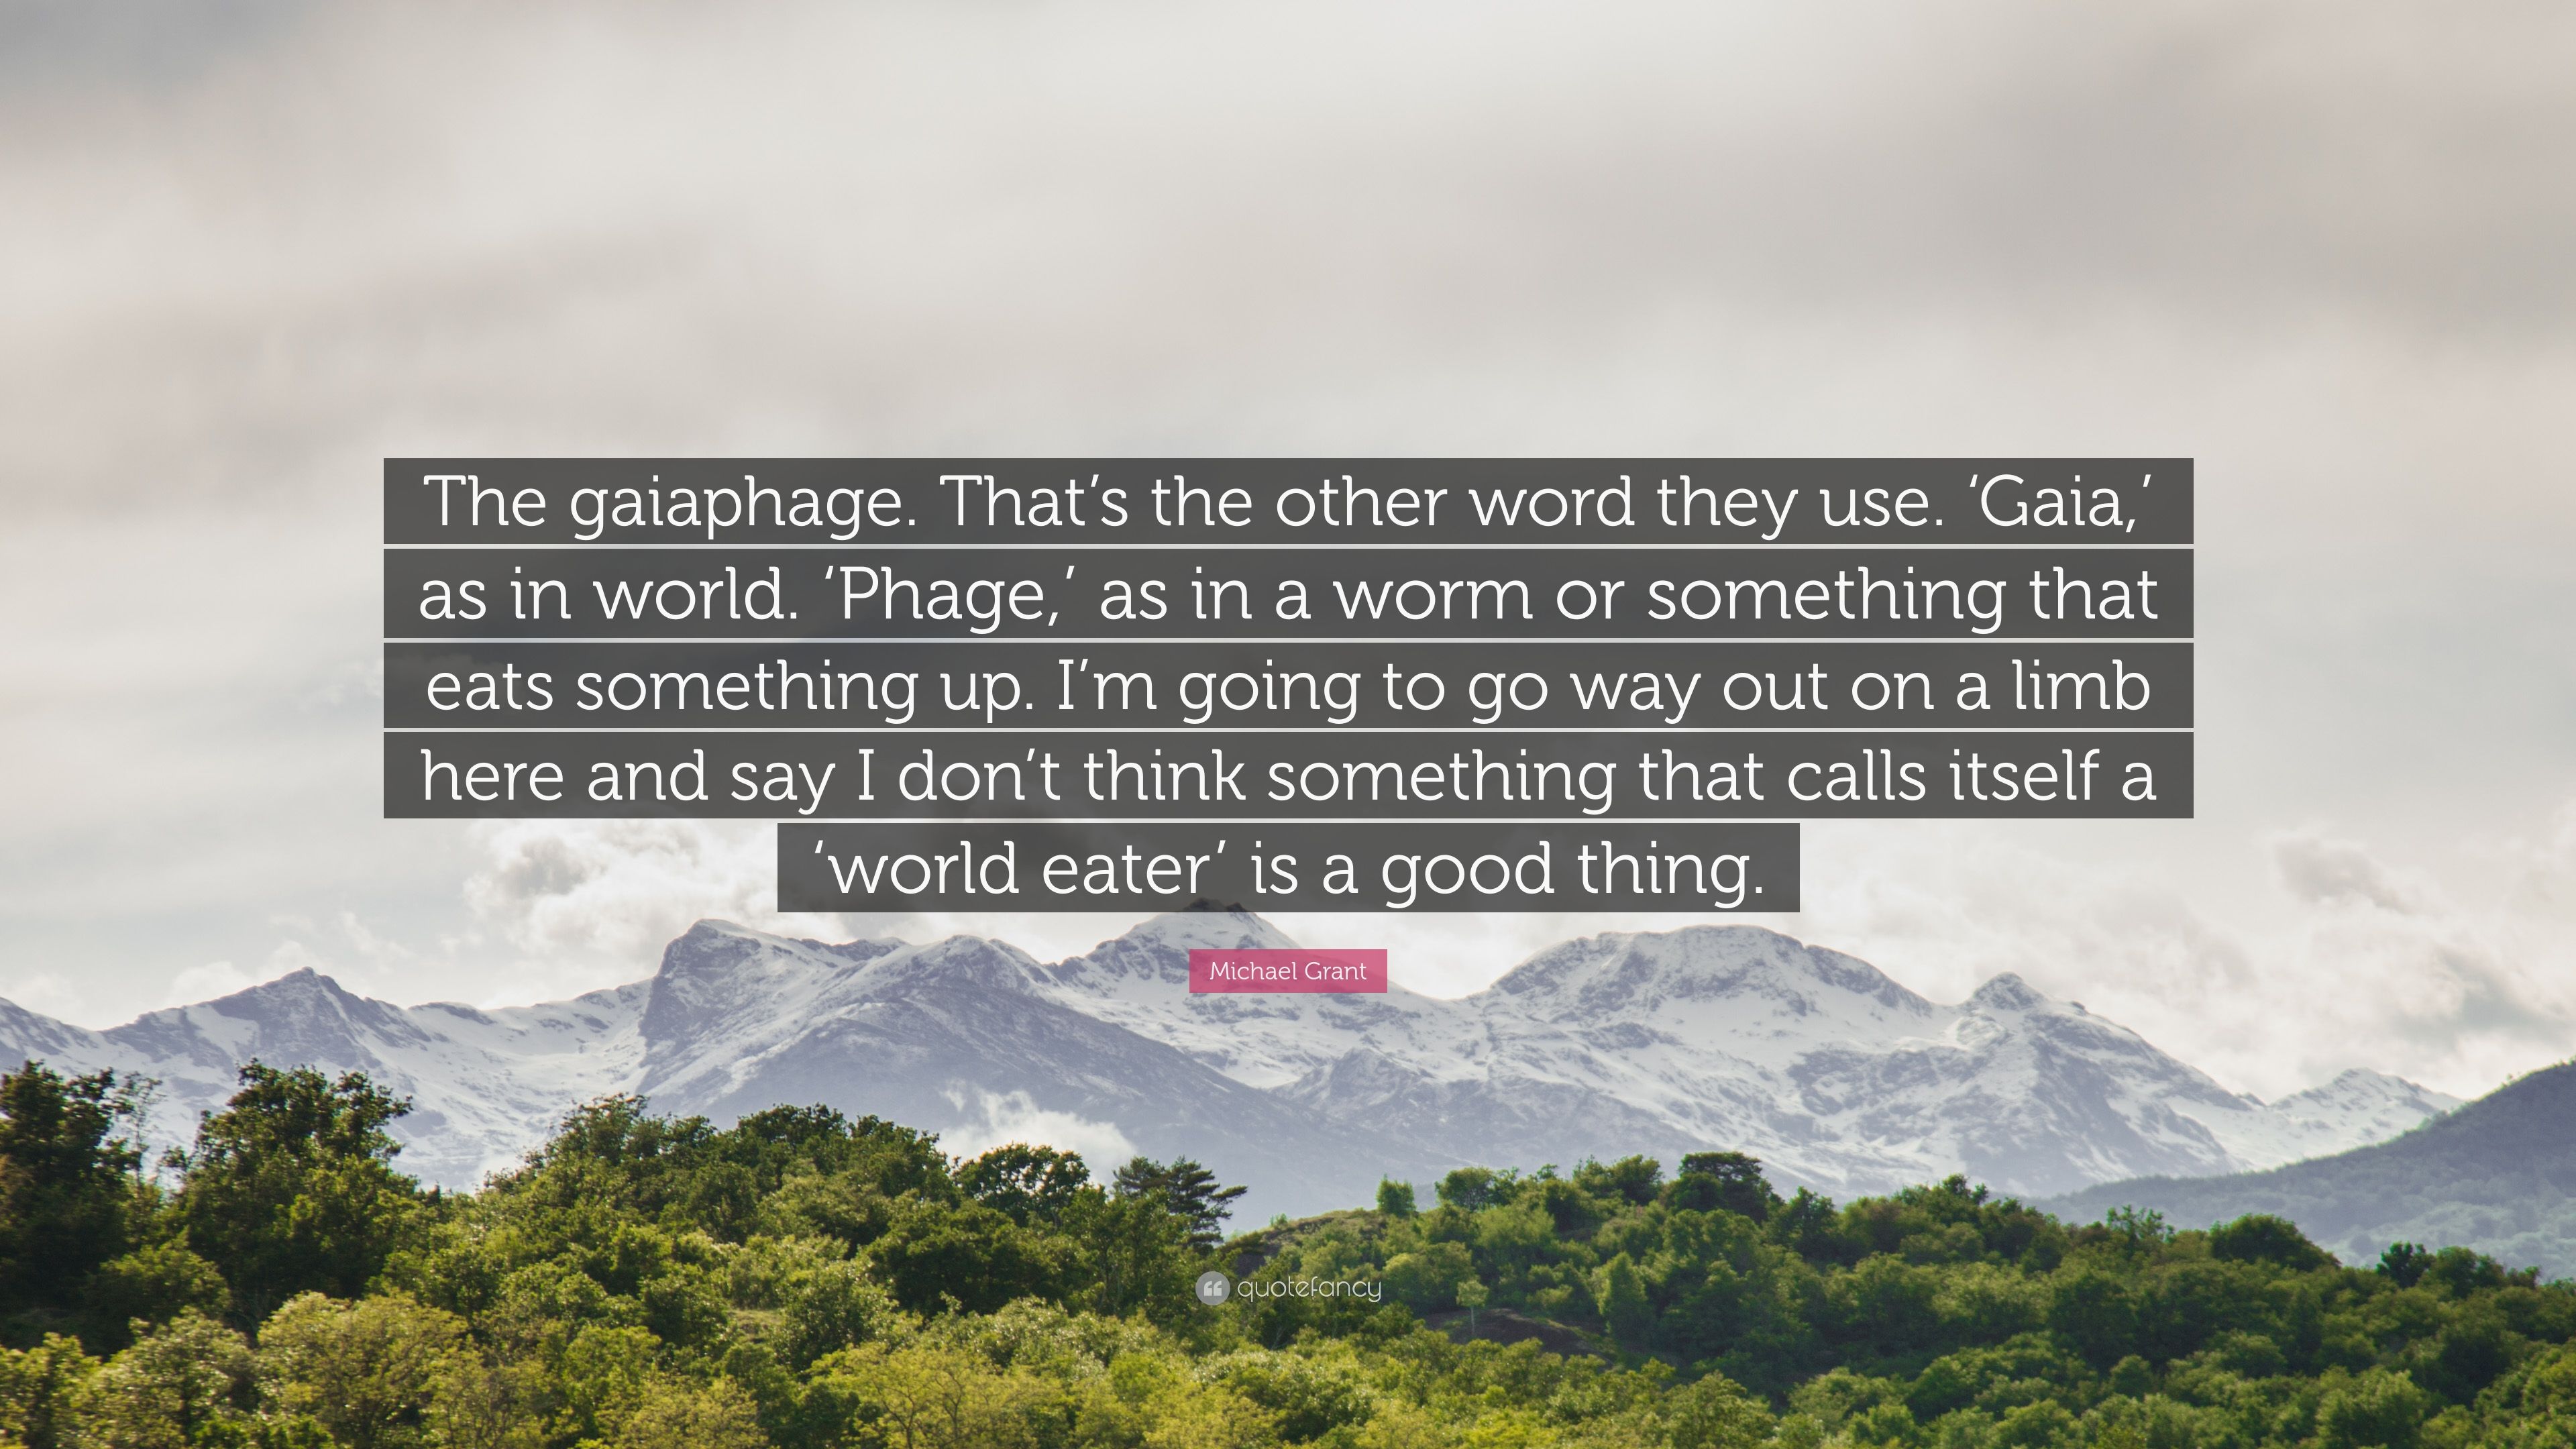 Michael Grant Quote: “The gaiaphage. That's the other word they use. 'Gaia, ' as in world. 'Phage, ' as in a worm or something that eats somethi.” (6 wallpaper)